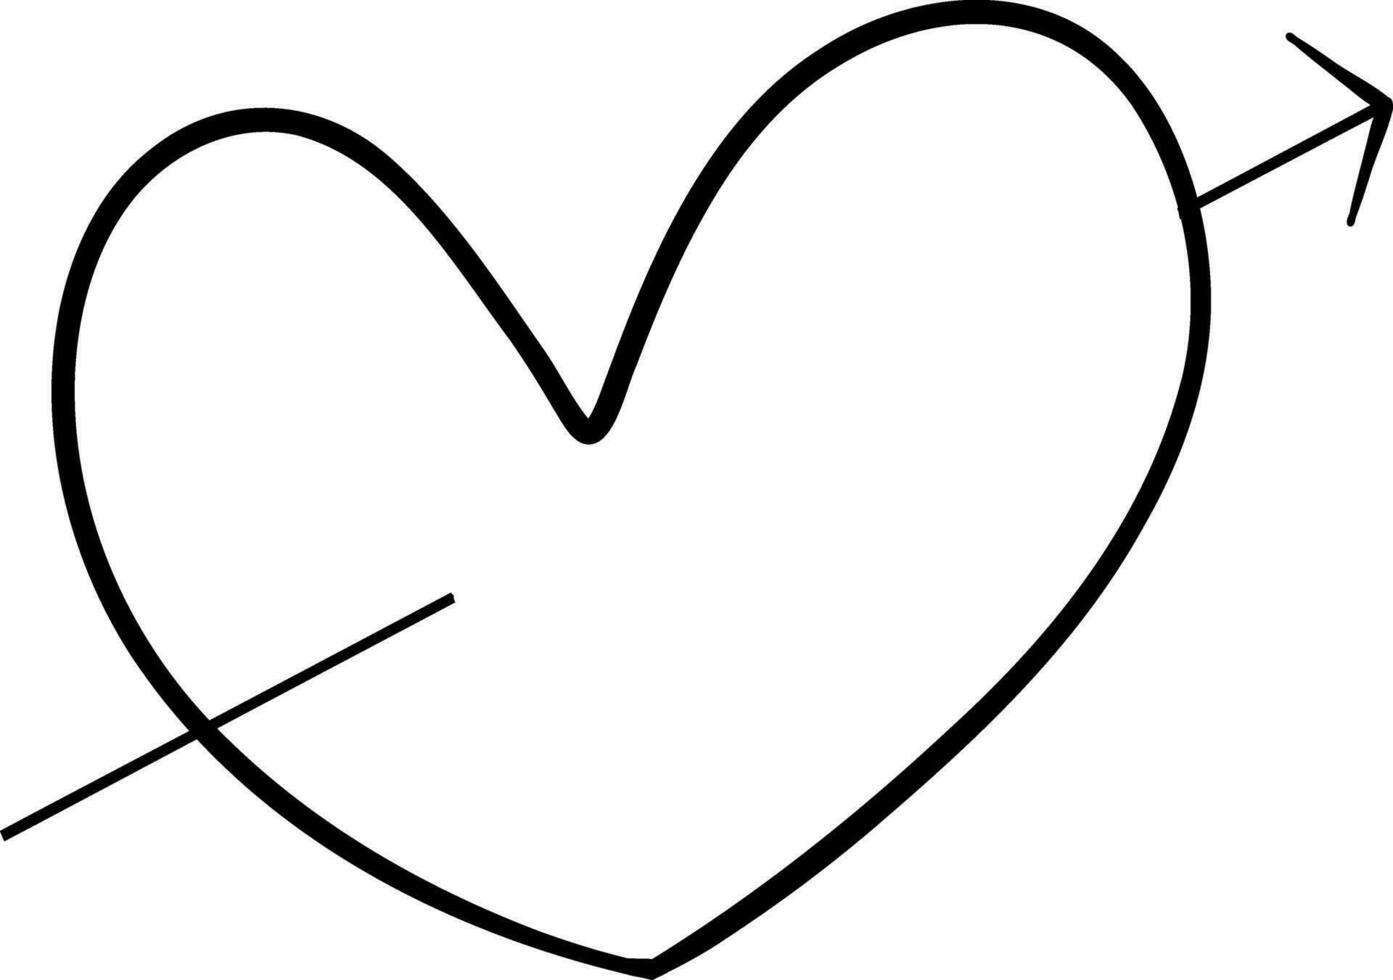 Hand drawn line heart on white background. vector